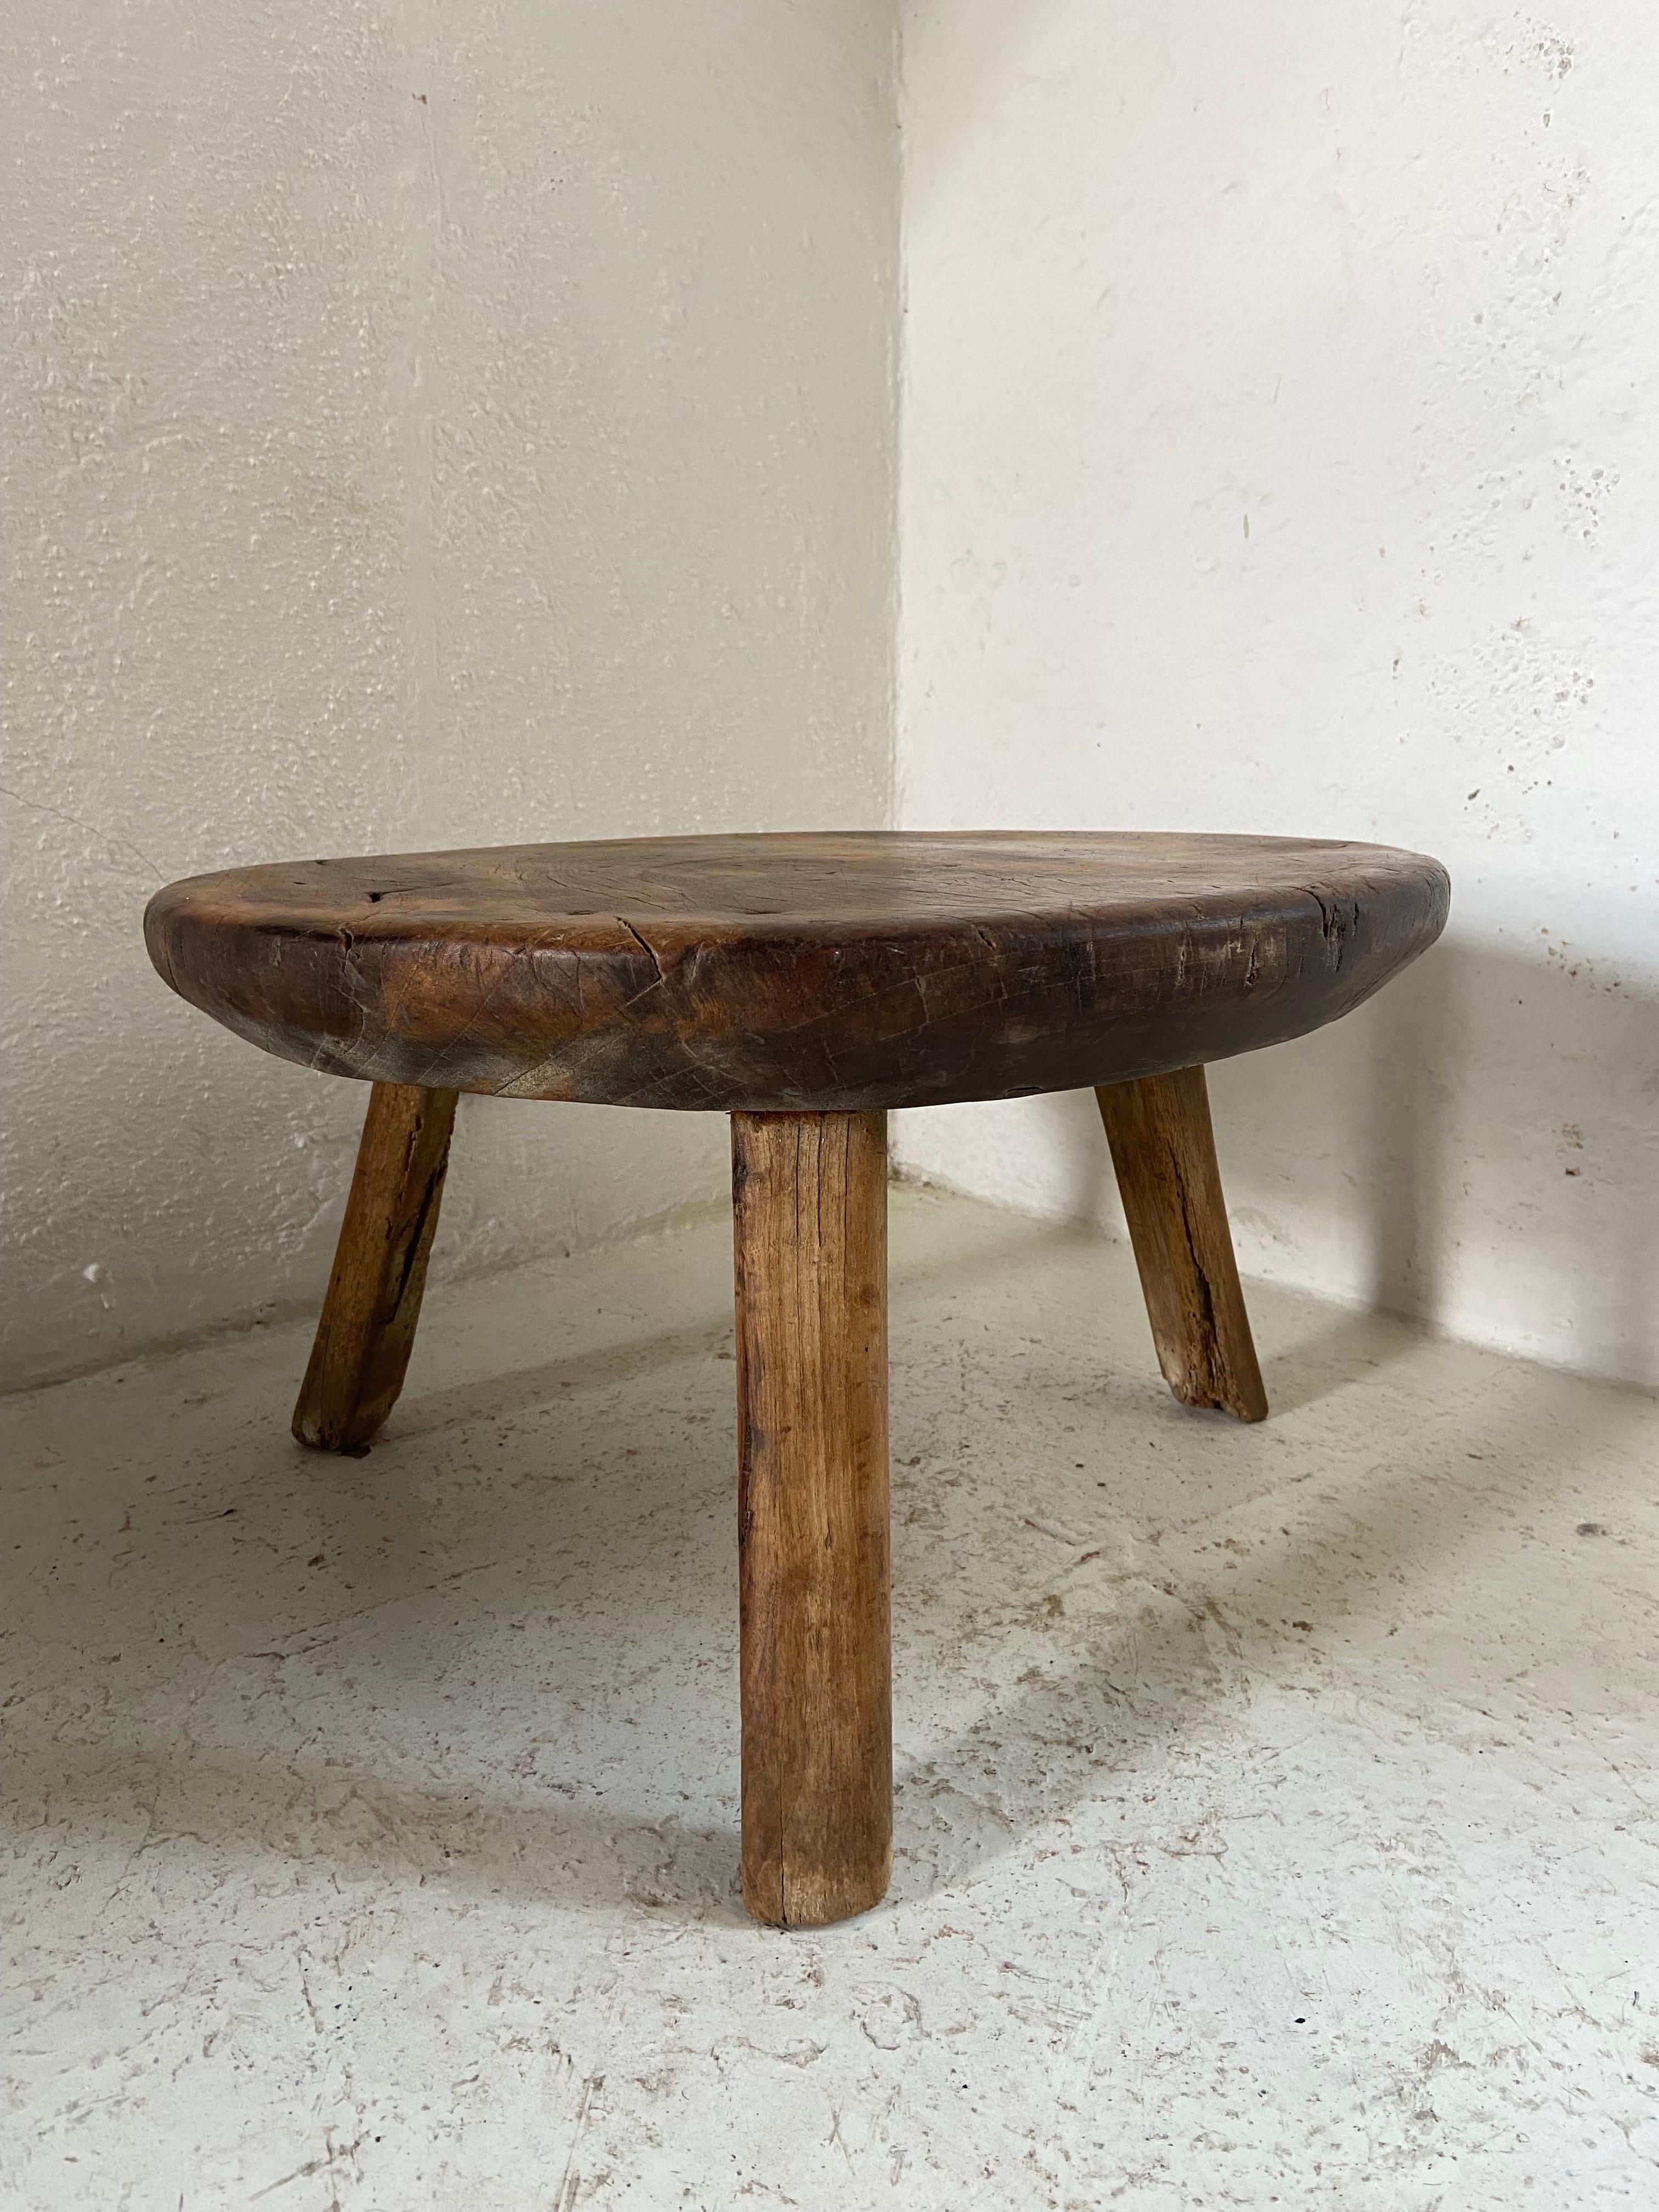 Mexican Hand Carved Primitive Low Table from Mexico, circa 1970s For Sale